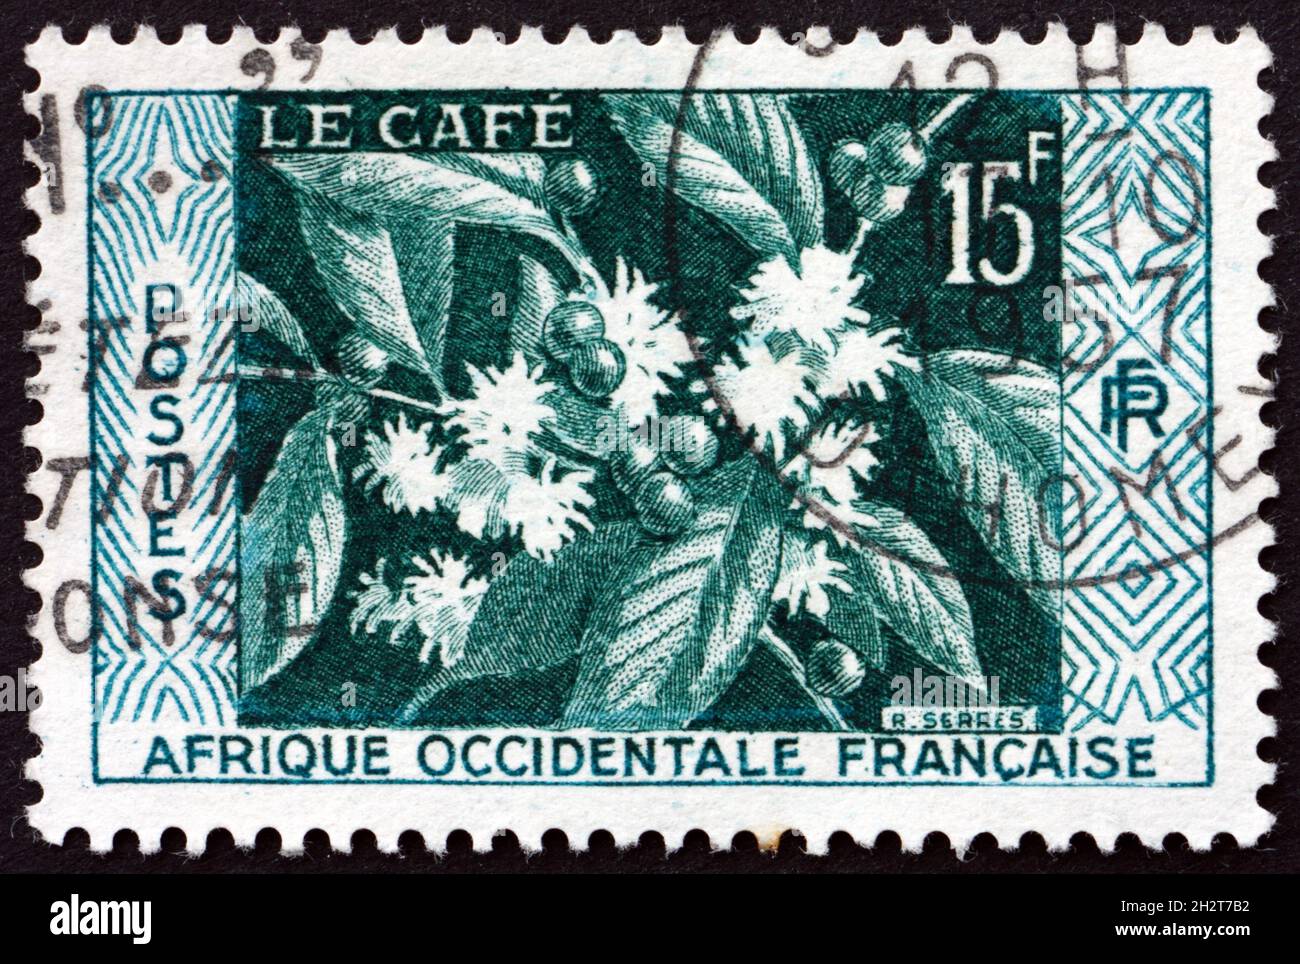 Made In France Stamp Shows French Product Or Produce